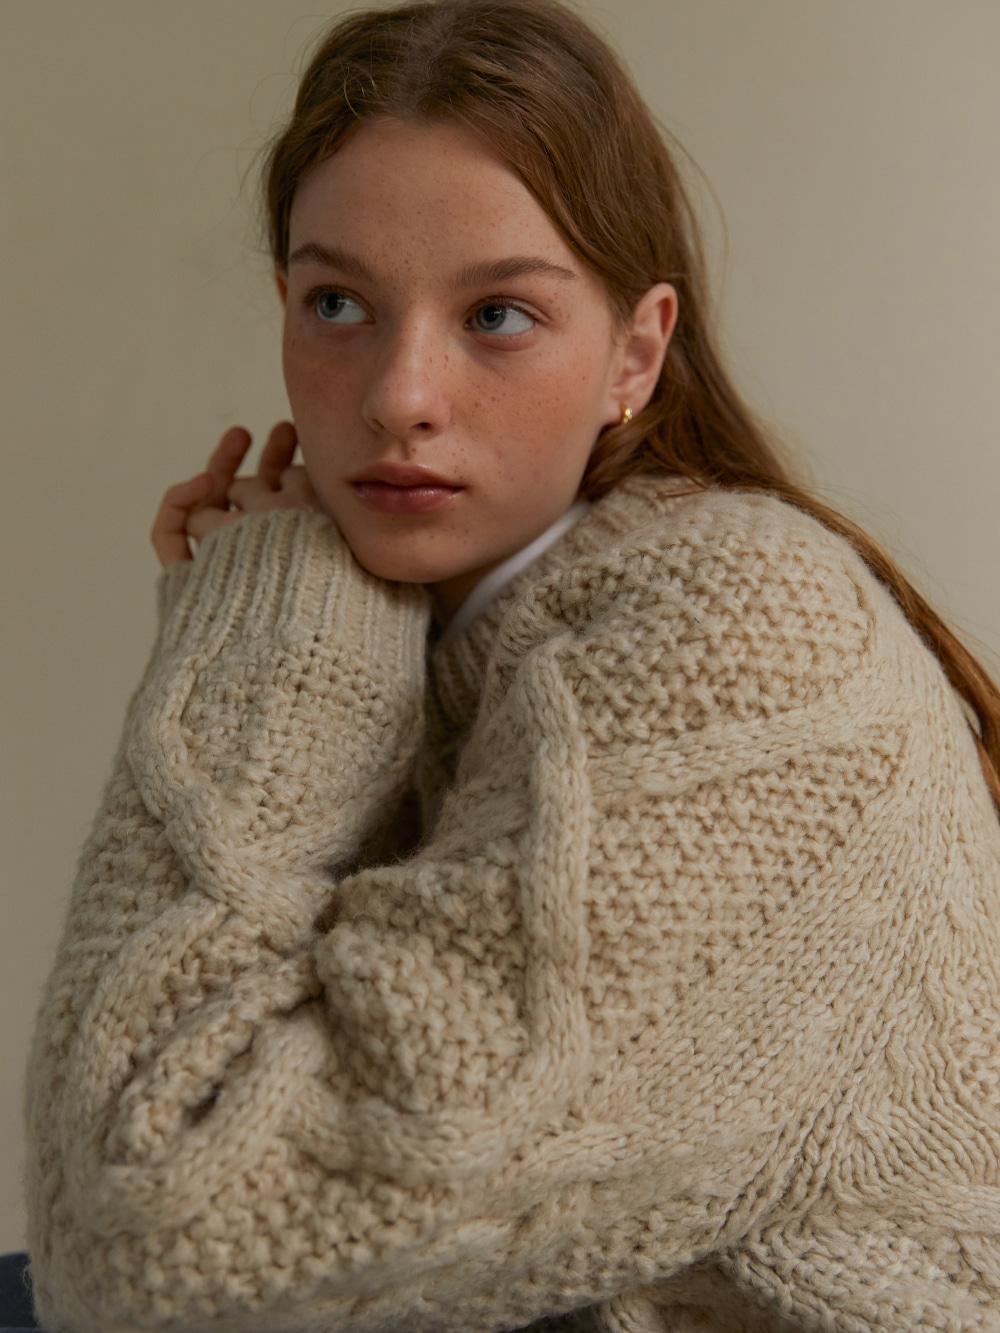 country sweater - beige